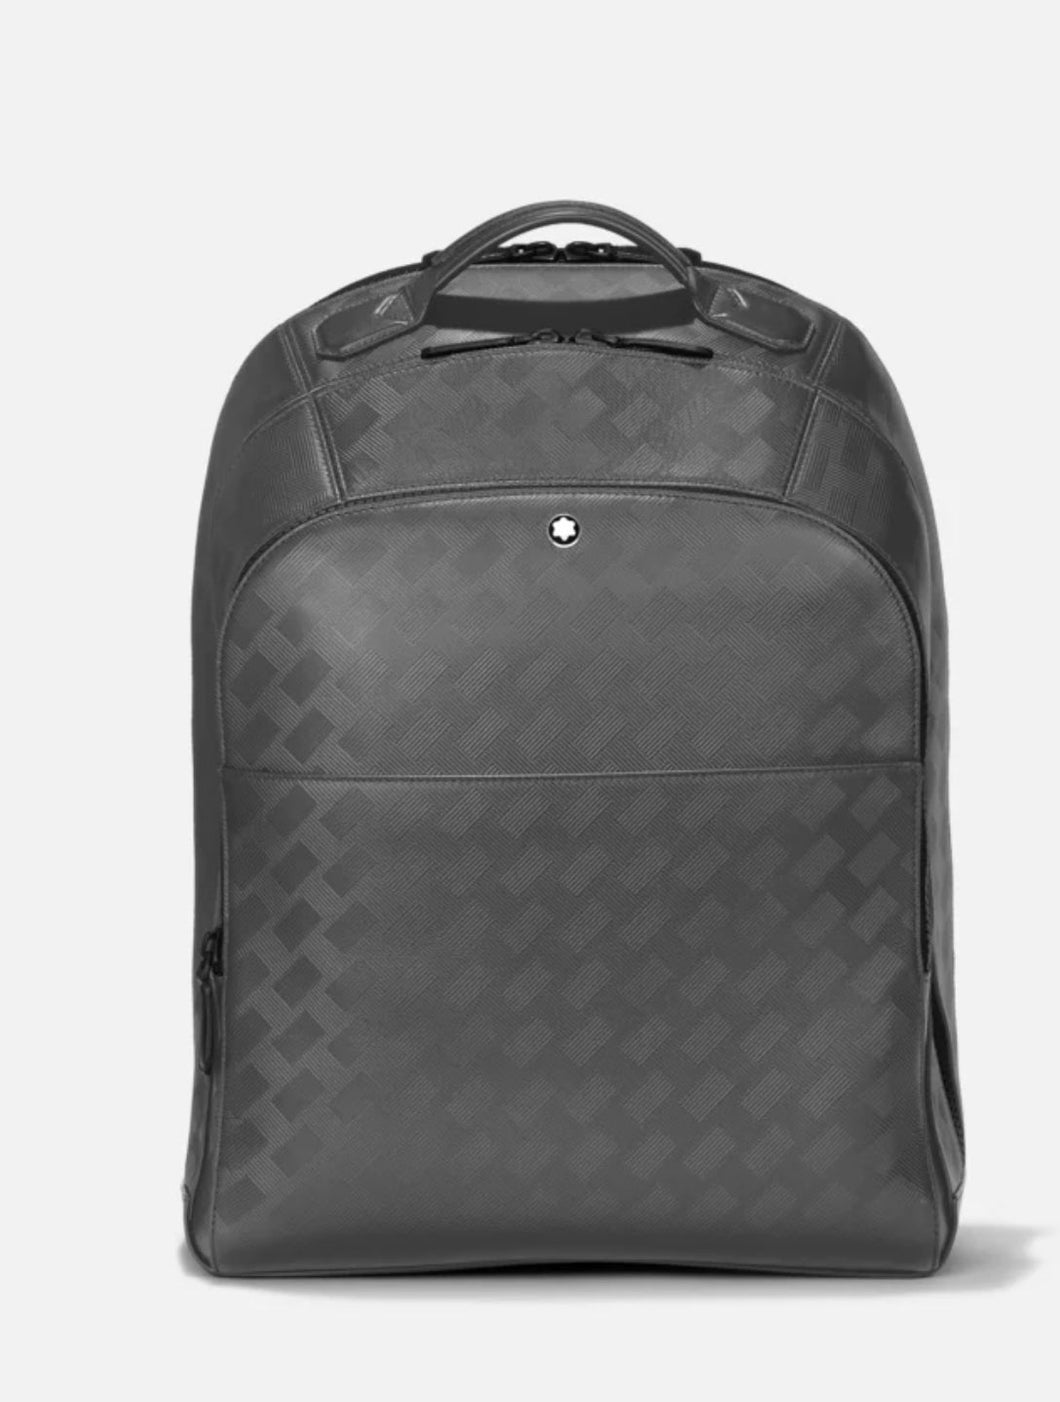 MONTBLANC-
EXTREME 3.0 LARGE BACKPACK 3 COMPARTMENTS 131749